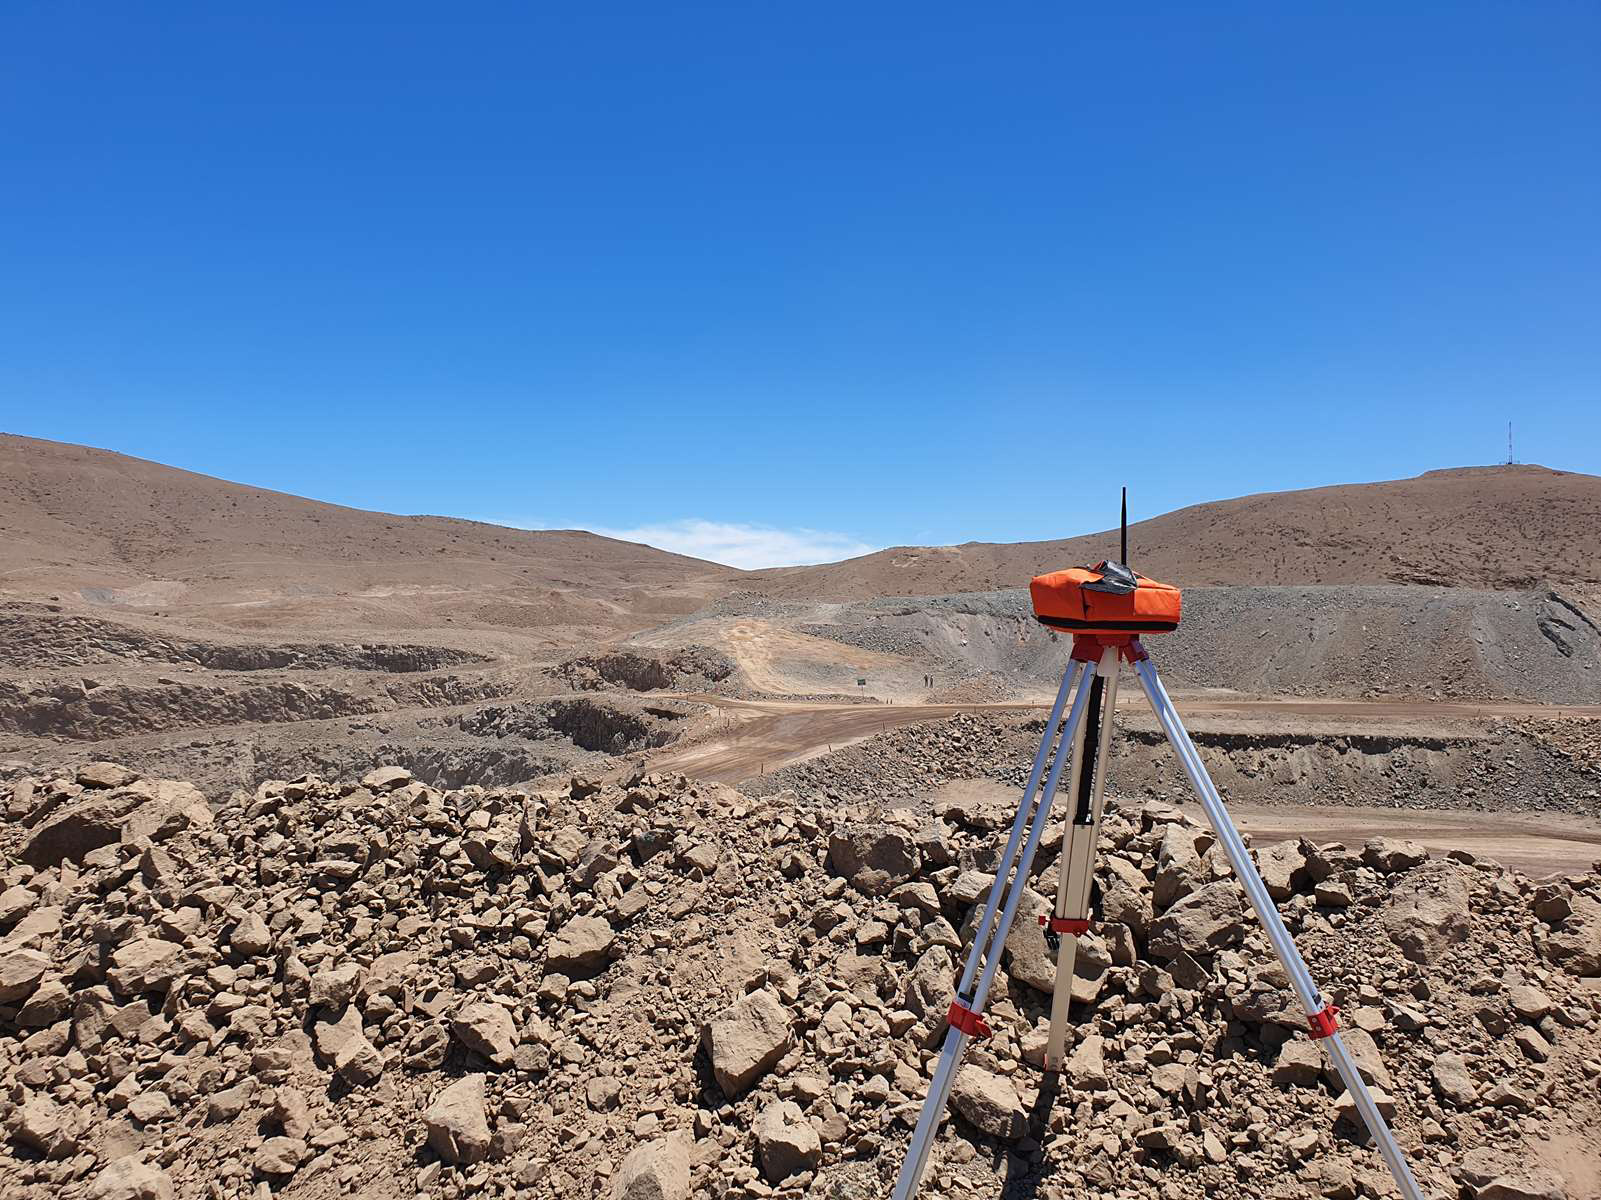 A wireless detonation system designed to increase productivity and safety at open pit mines